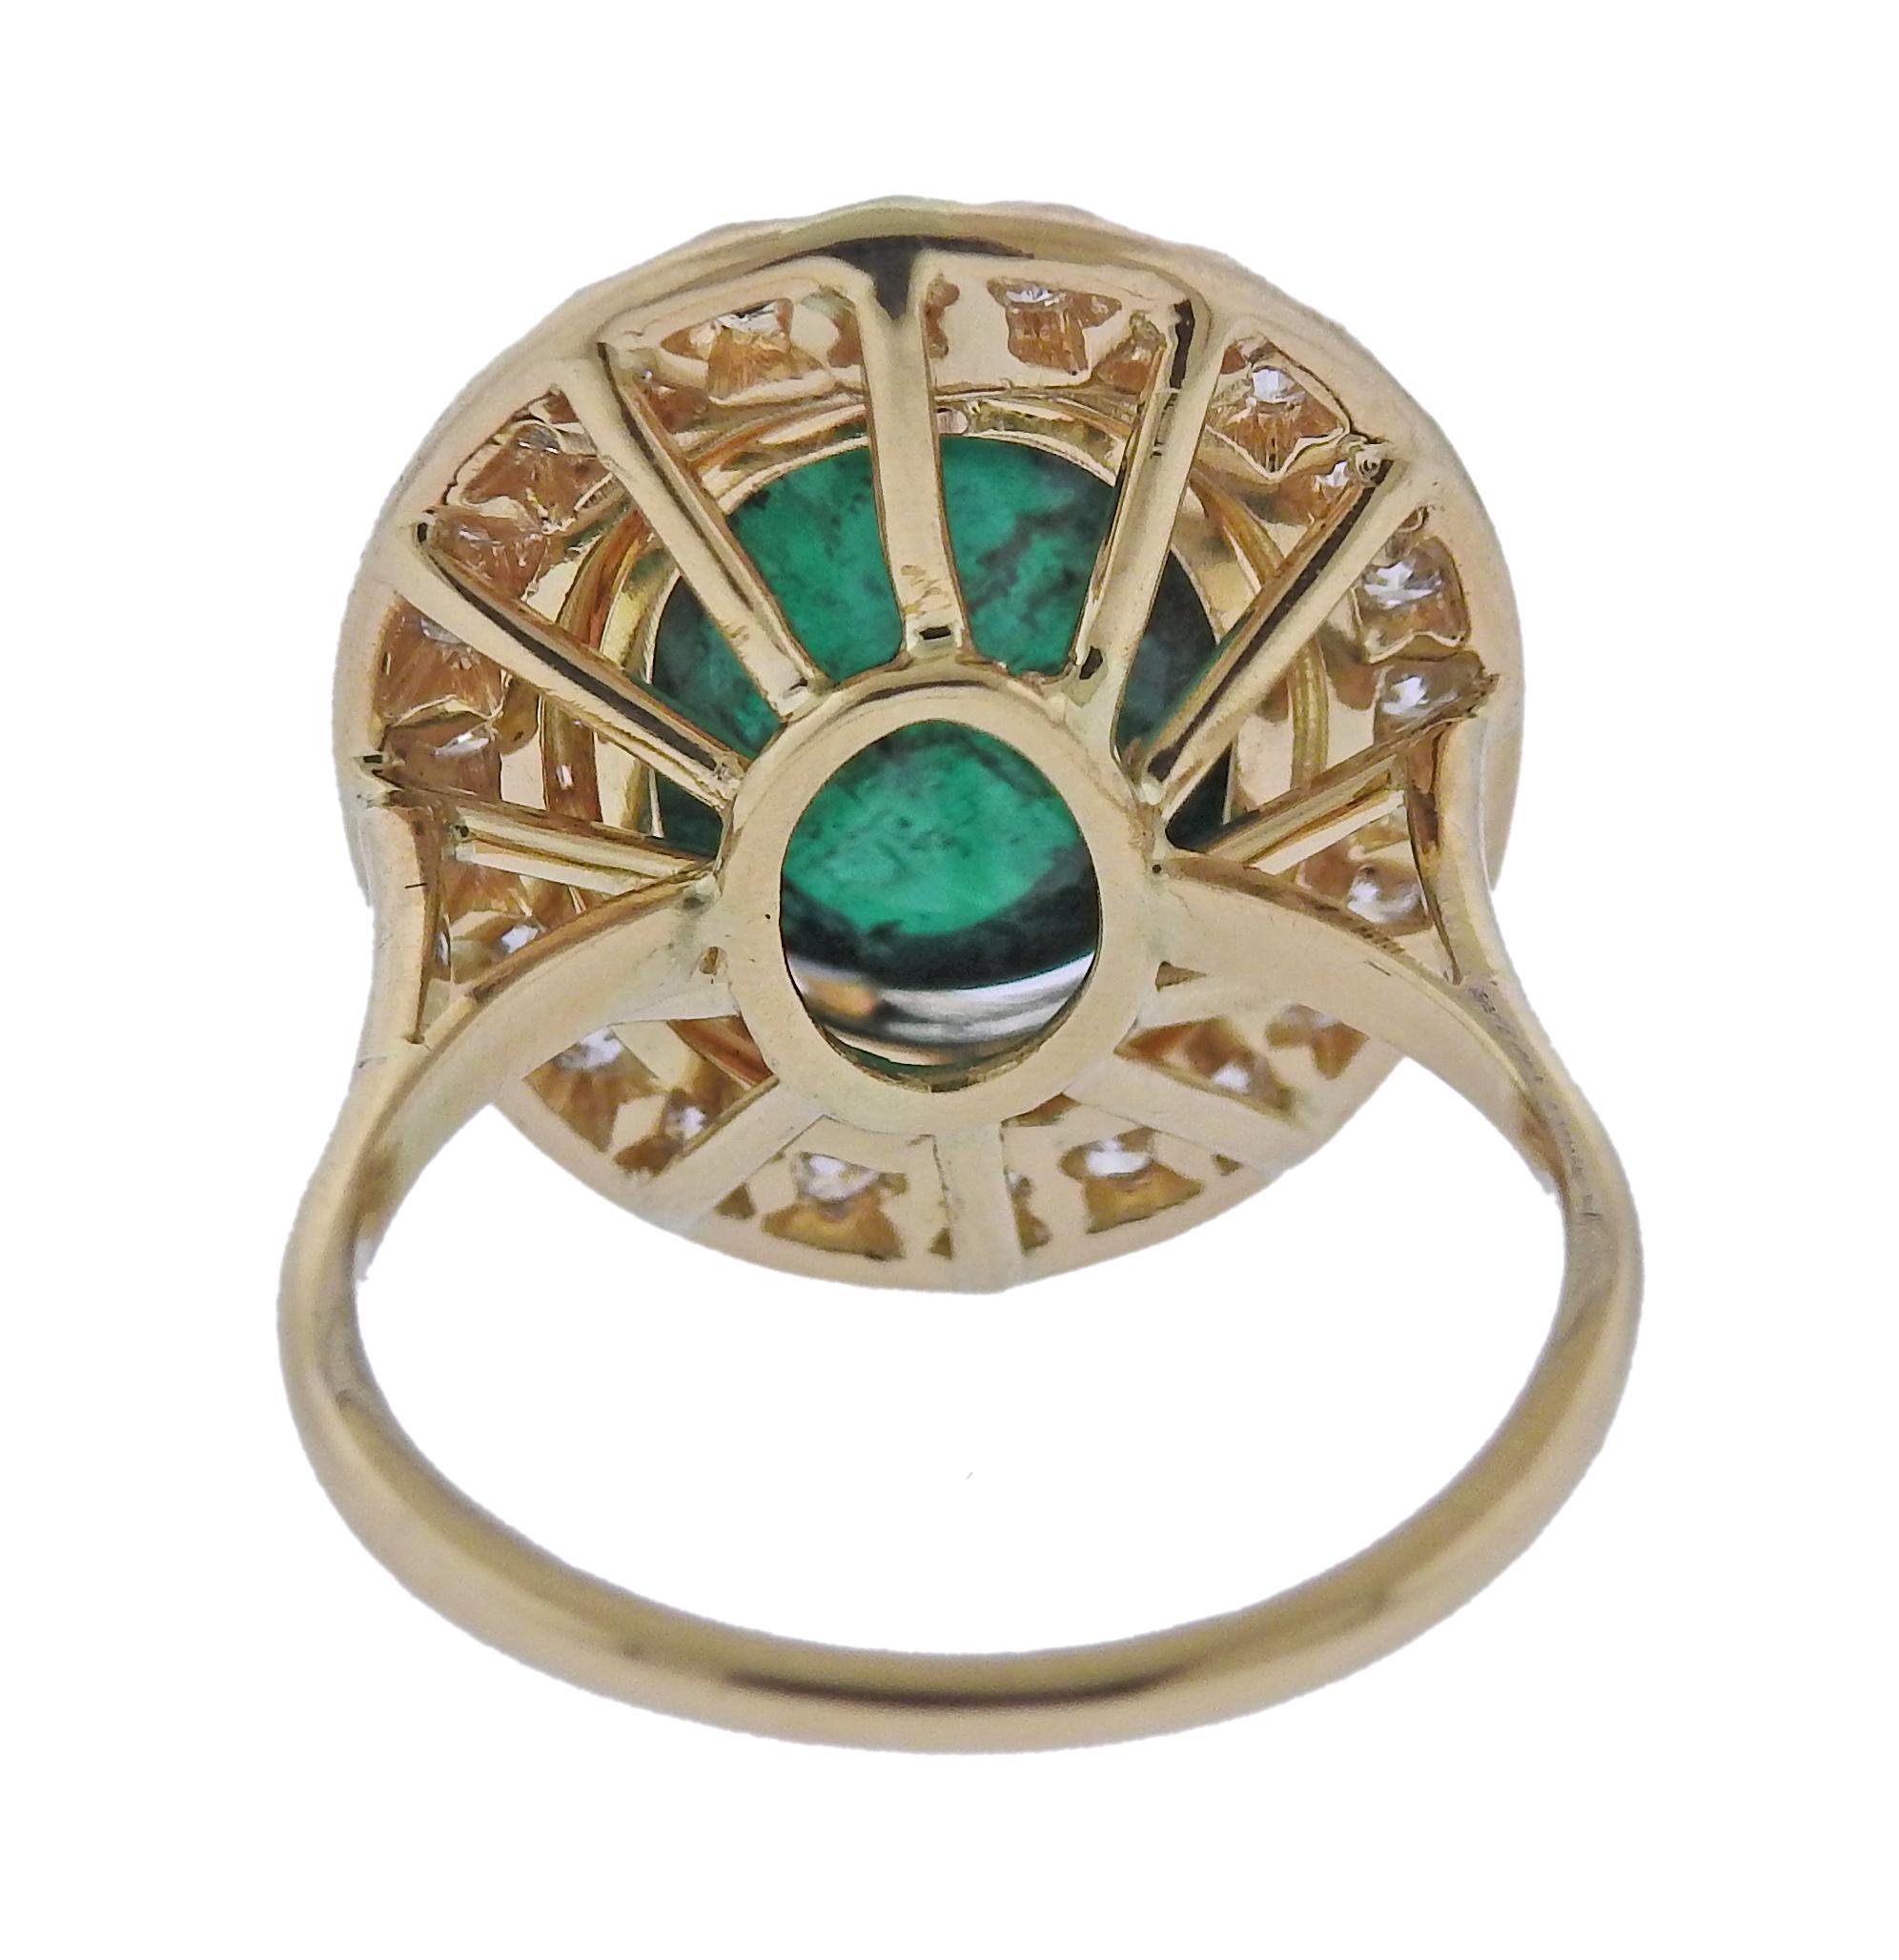 7.75 Carat Emerald Cabochon Diamond Gold Ring In Good Condition For Sale In New York, NY